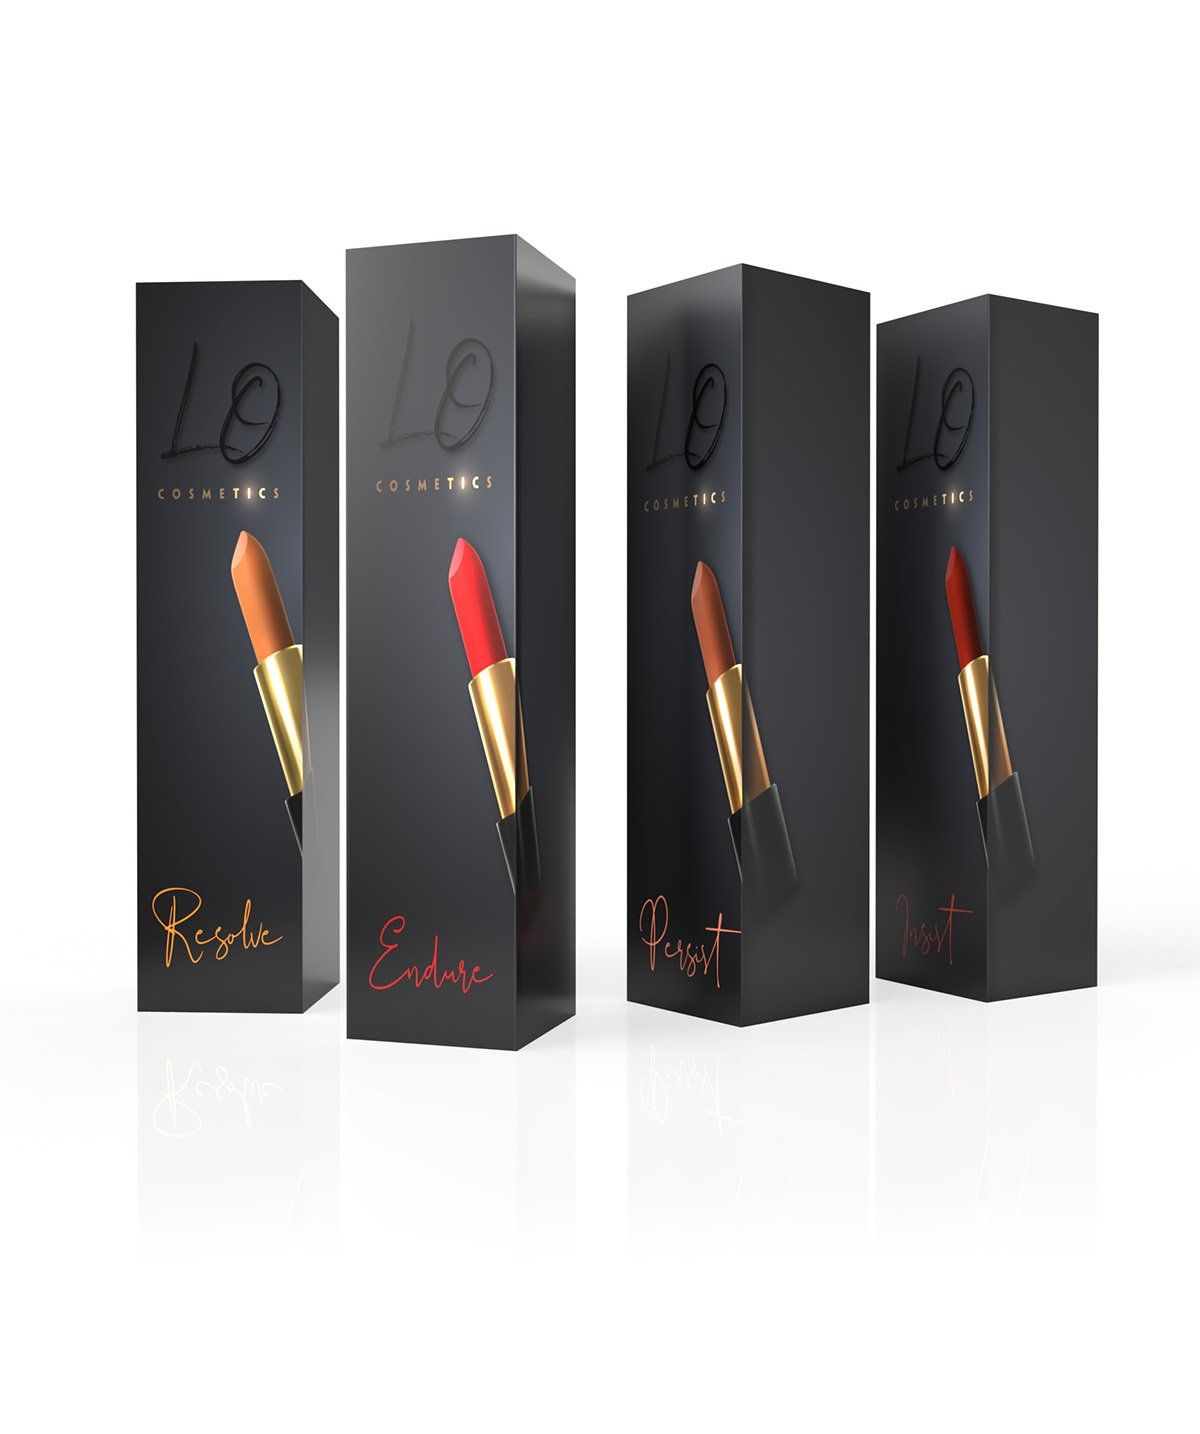 image of a design concept for lipstick packaging